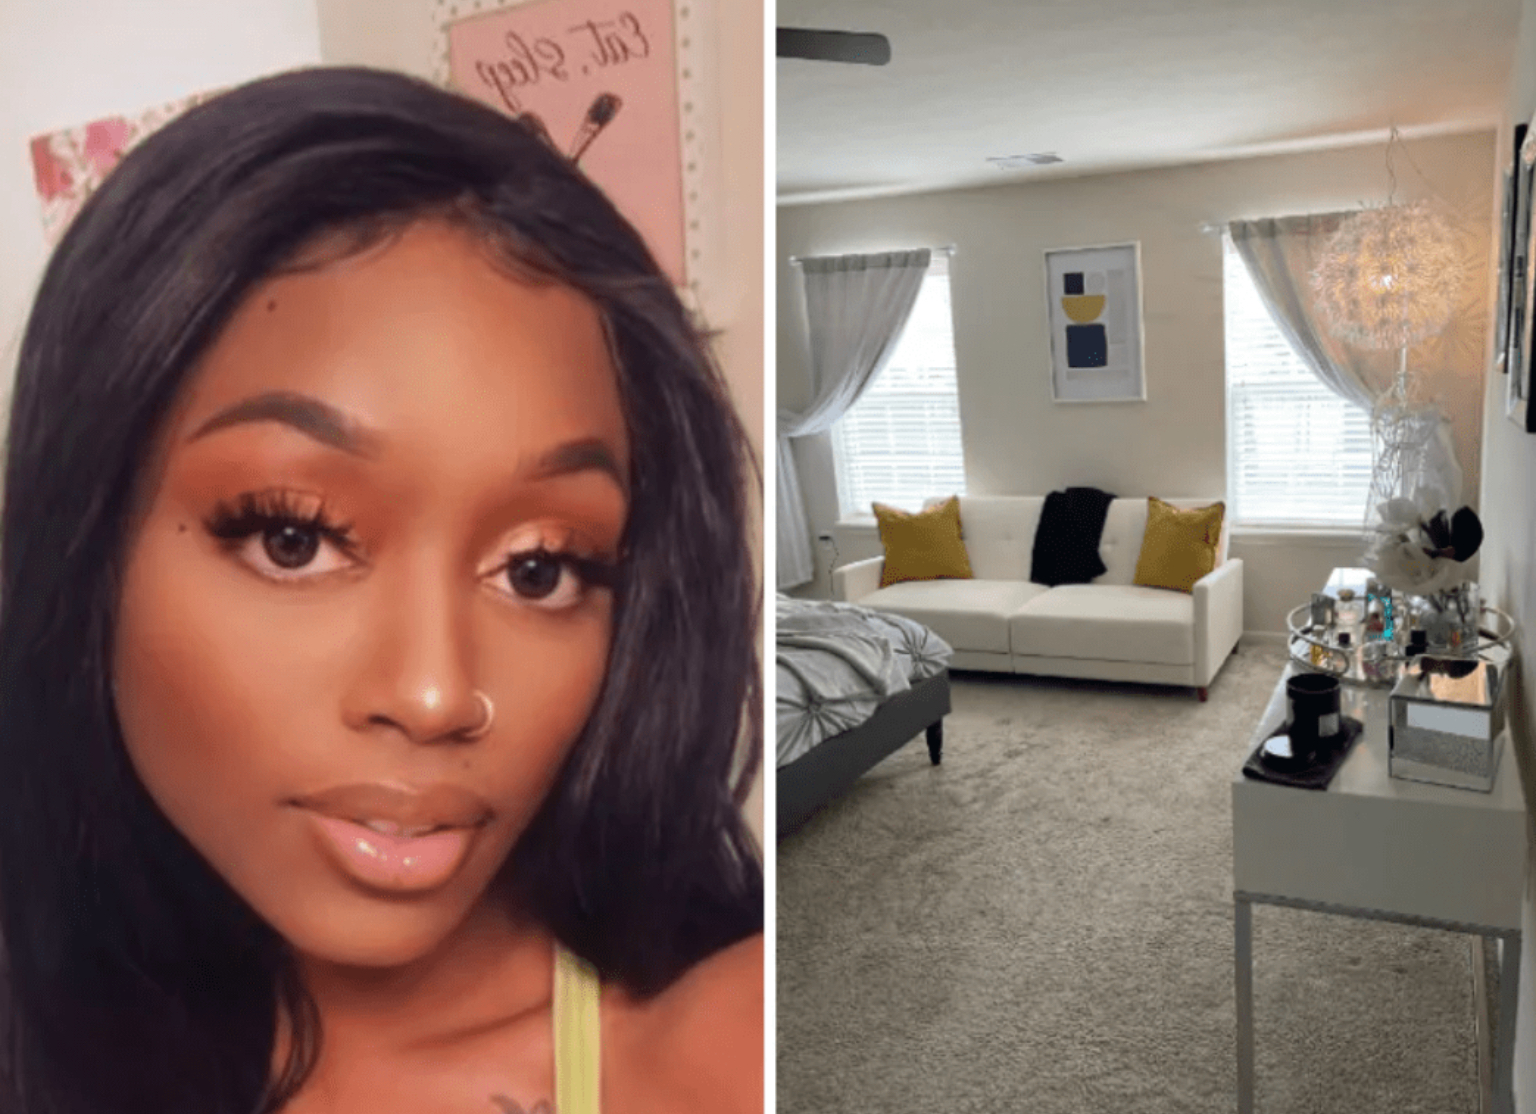 Lady Captivates Social Media Users With Pictures Of Her Room